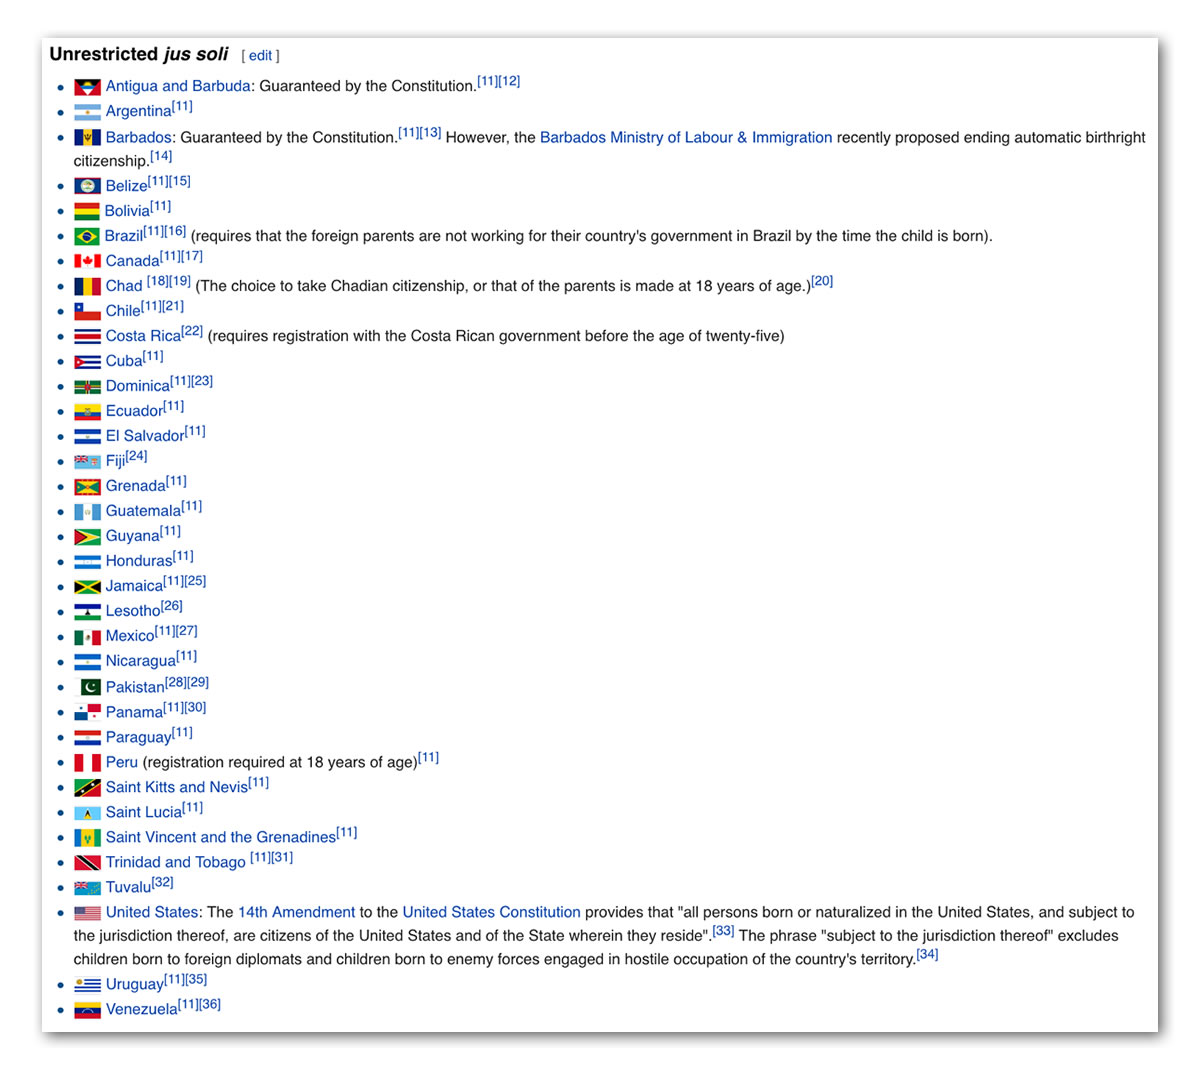 Screenshot of Wikipedia section showing how many countries have unrestricted birthright citizenship.